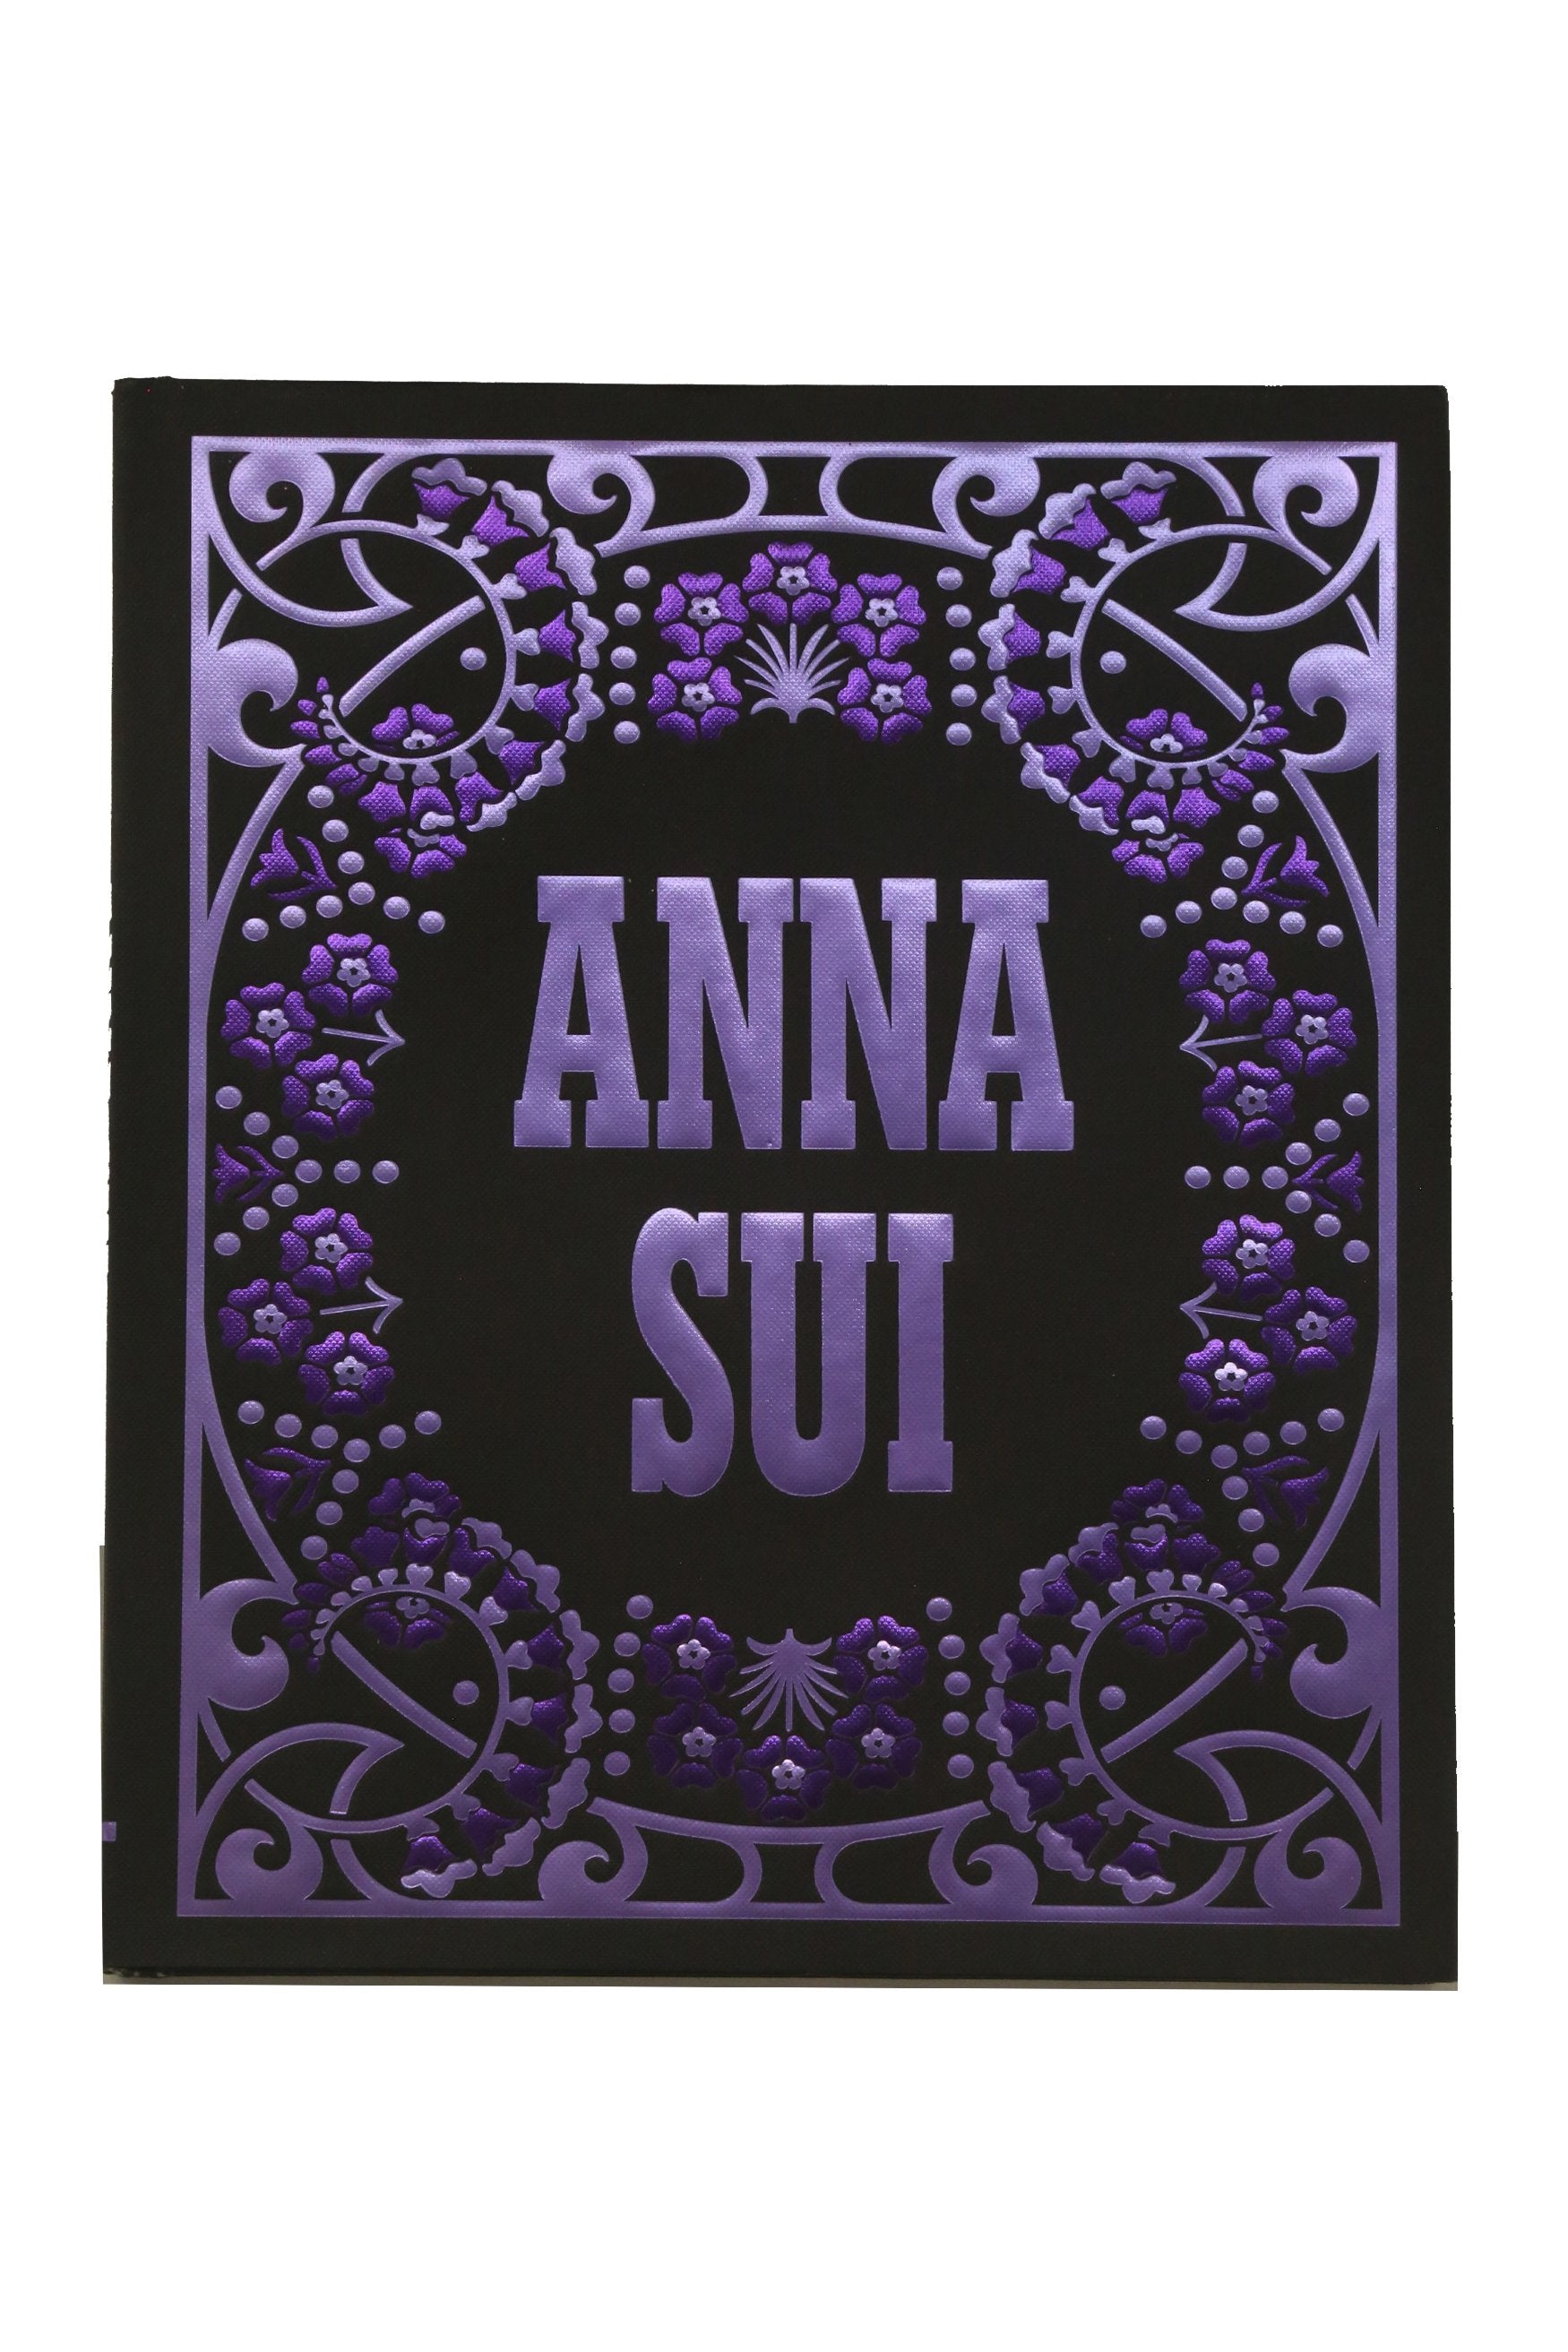 "ANNA SUI" Written by Andrew Bolton - Anna Sui